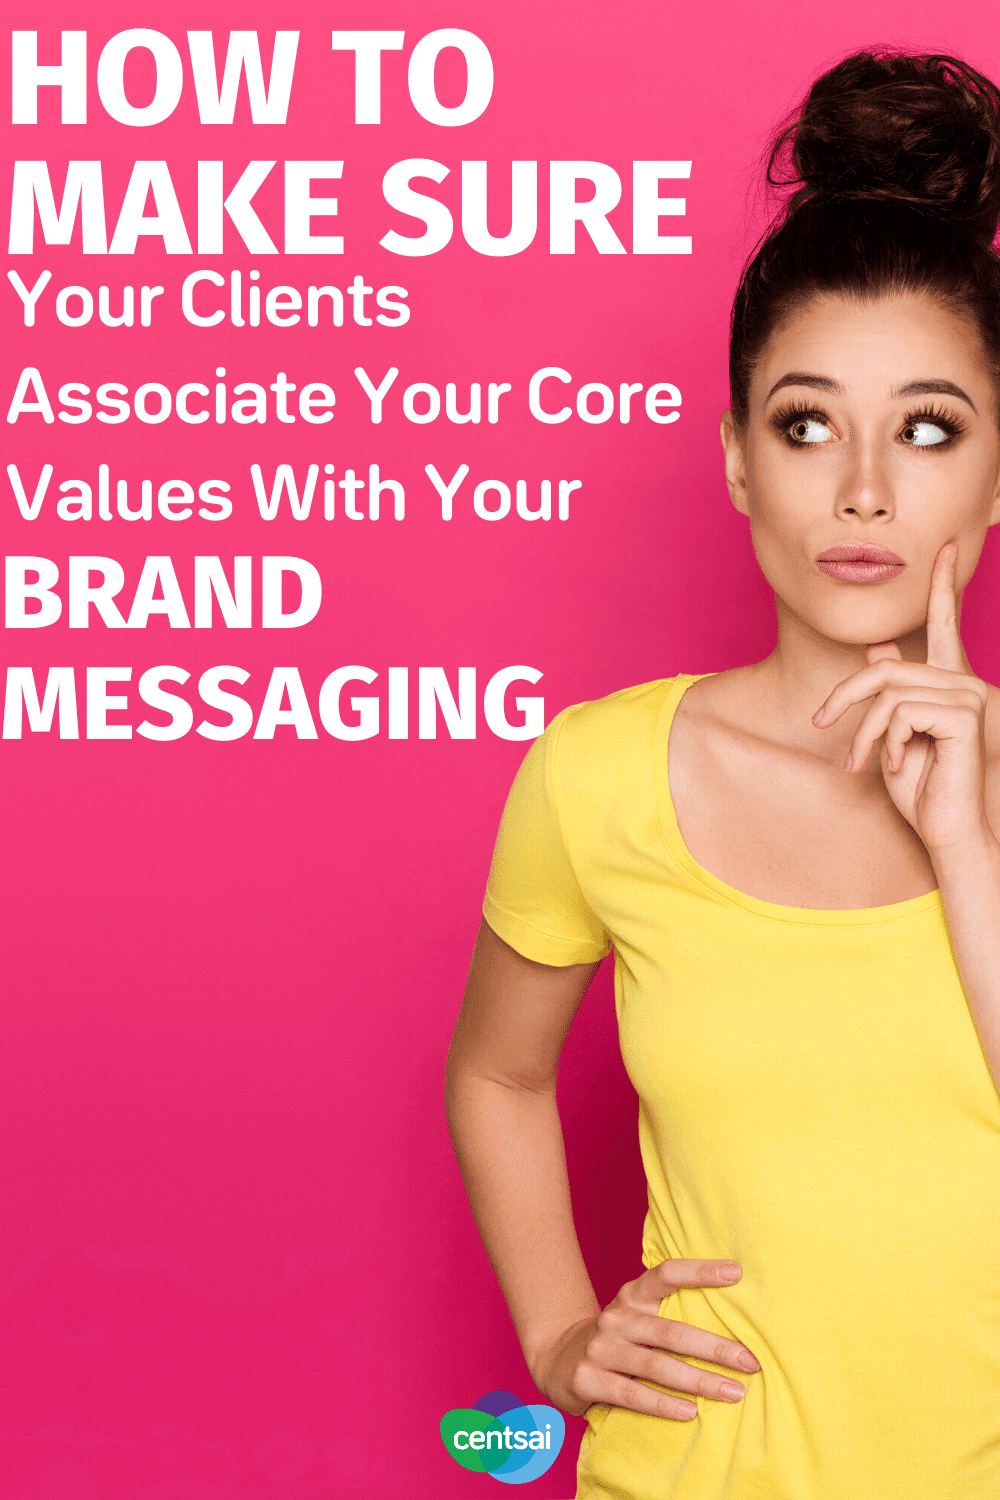 How to Make Sure Your Clients Associate Your Core Values With Your Brand Messaging